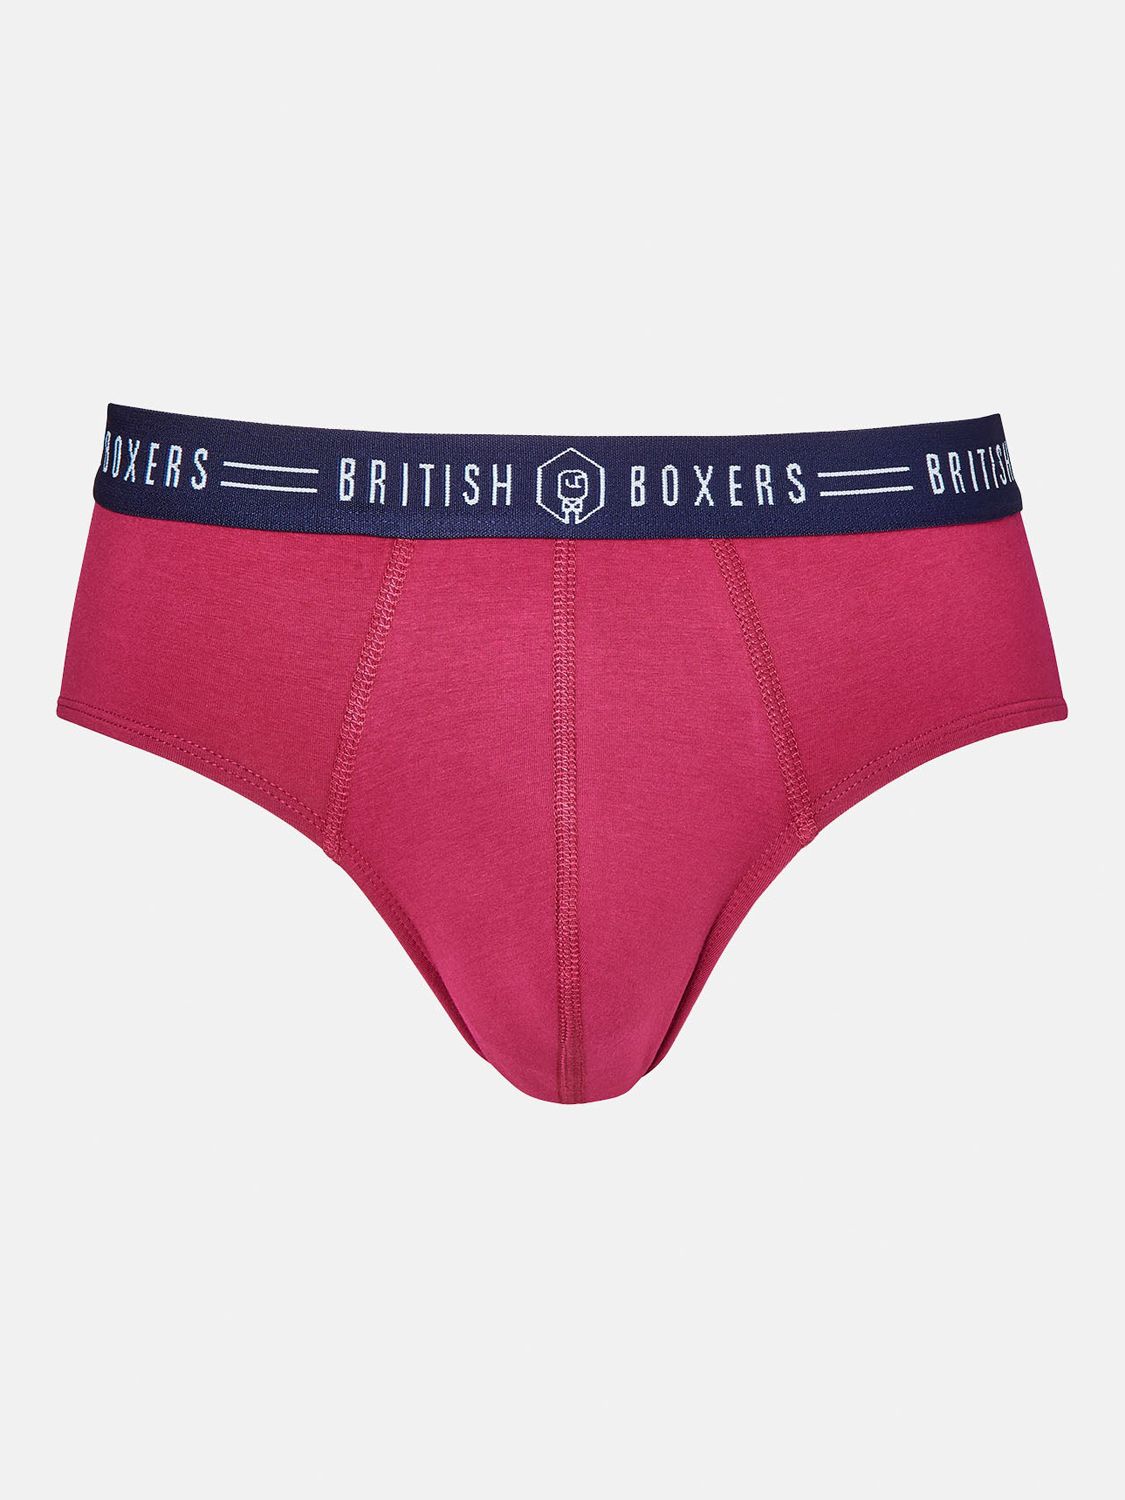 British Boxers Heritage Cotton Blend Briefs, Pack of 3, Rio Red/Navy/Evergreen, S